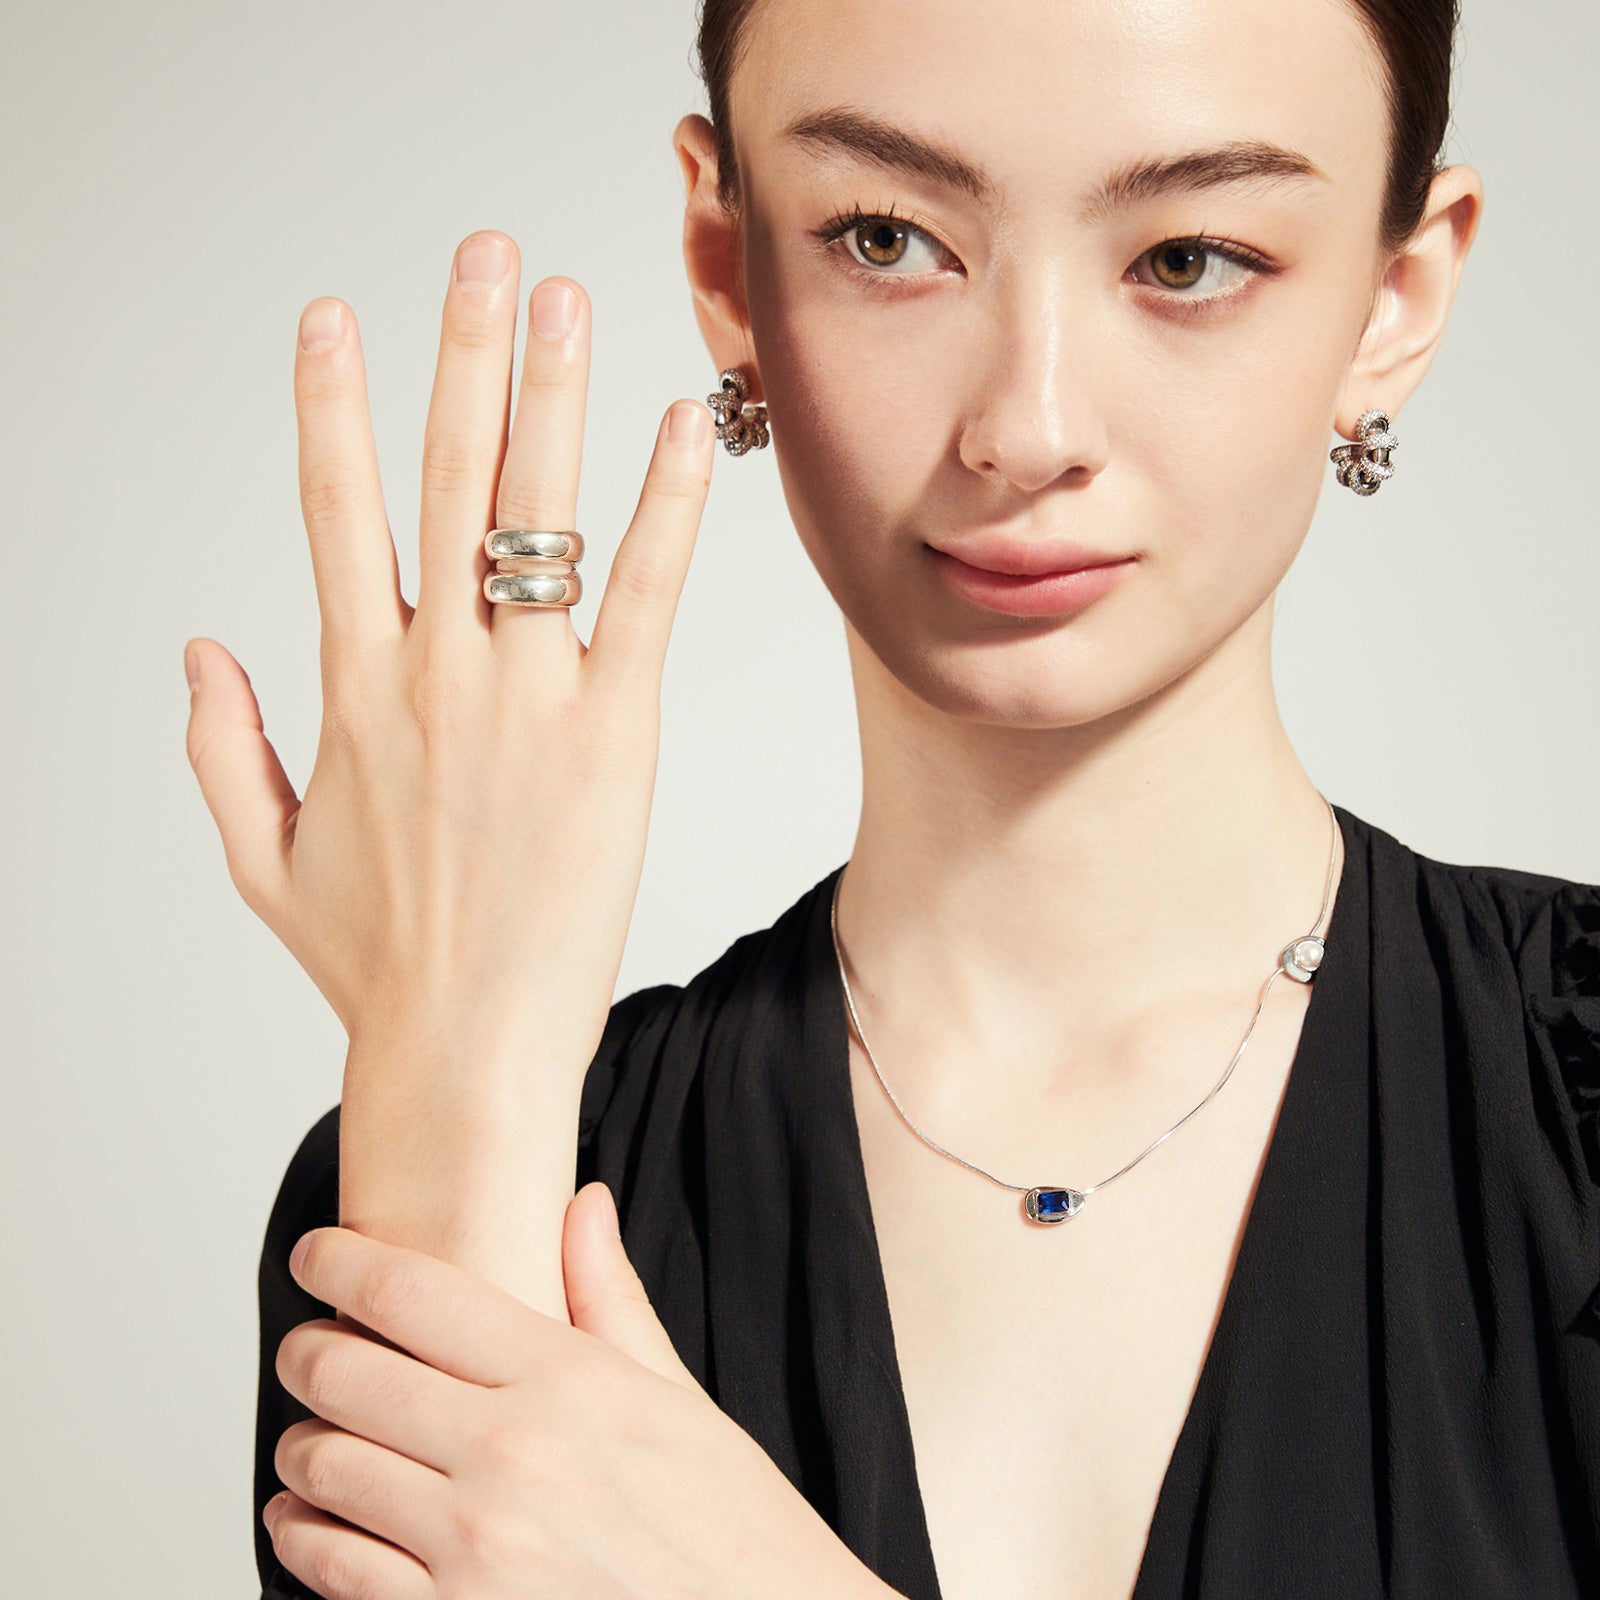 Timeless Charm with Vintage-Inspired Silver Rings"